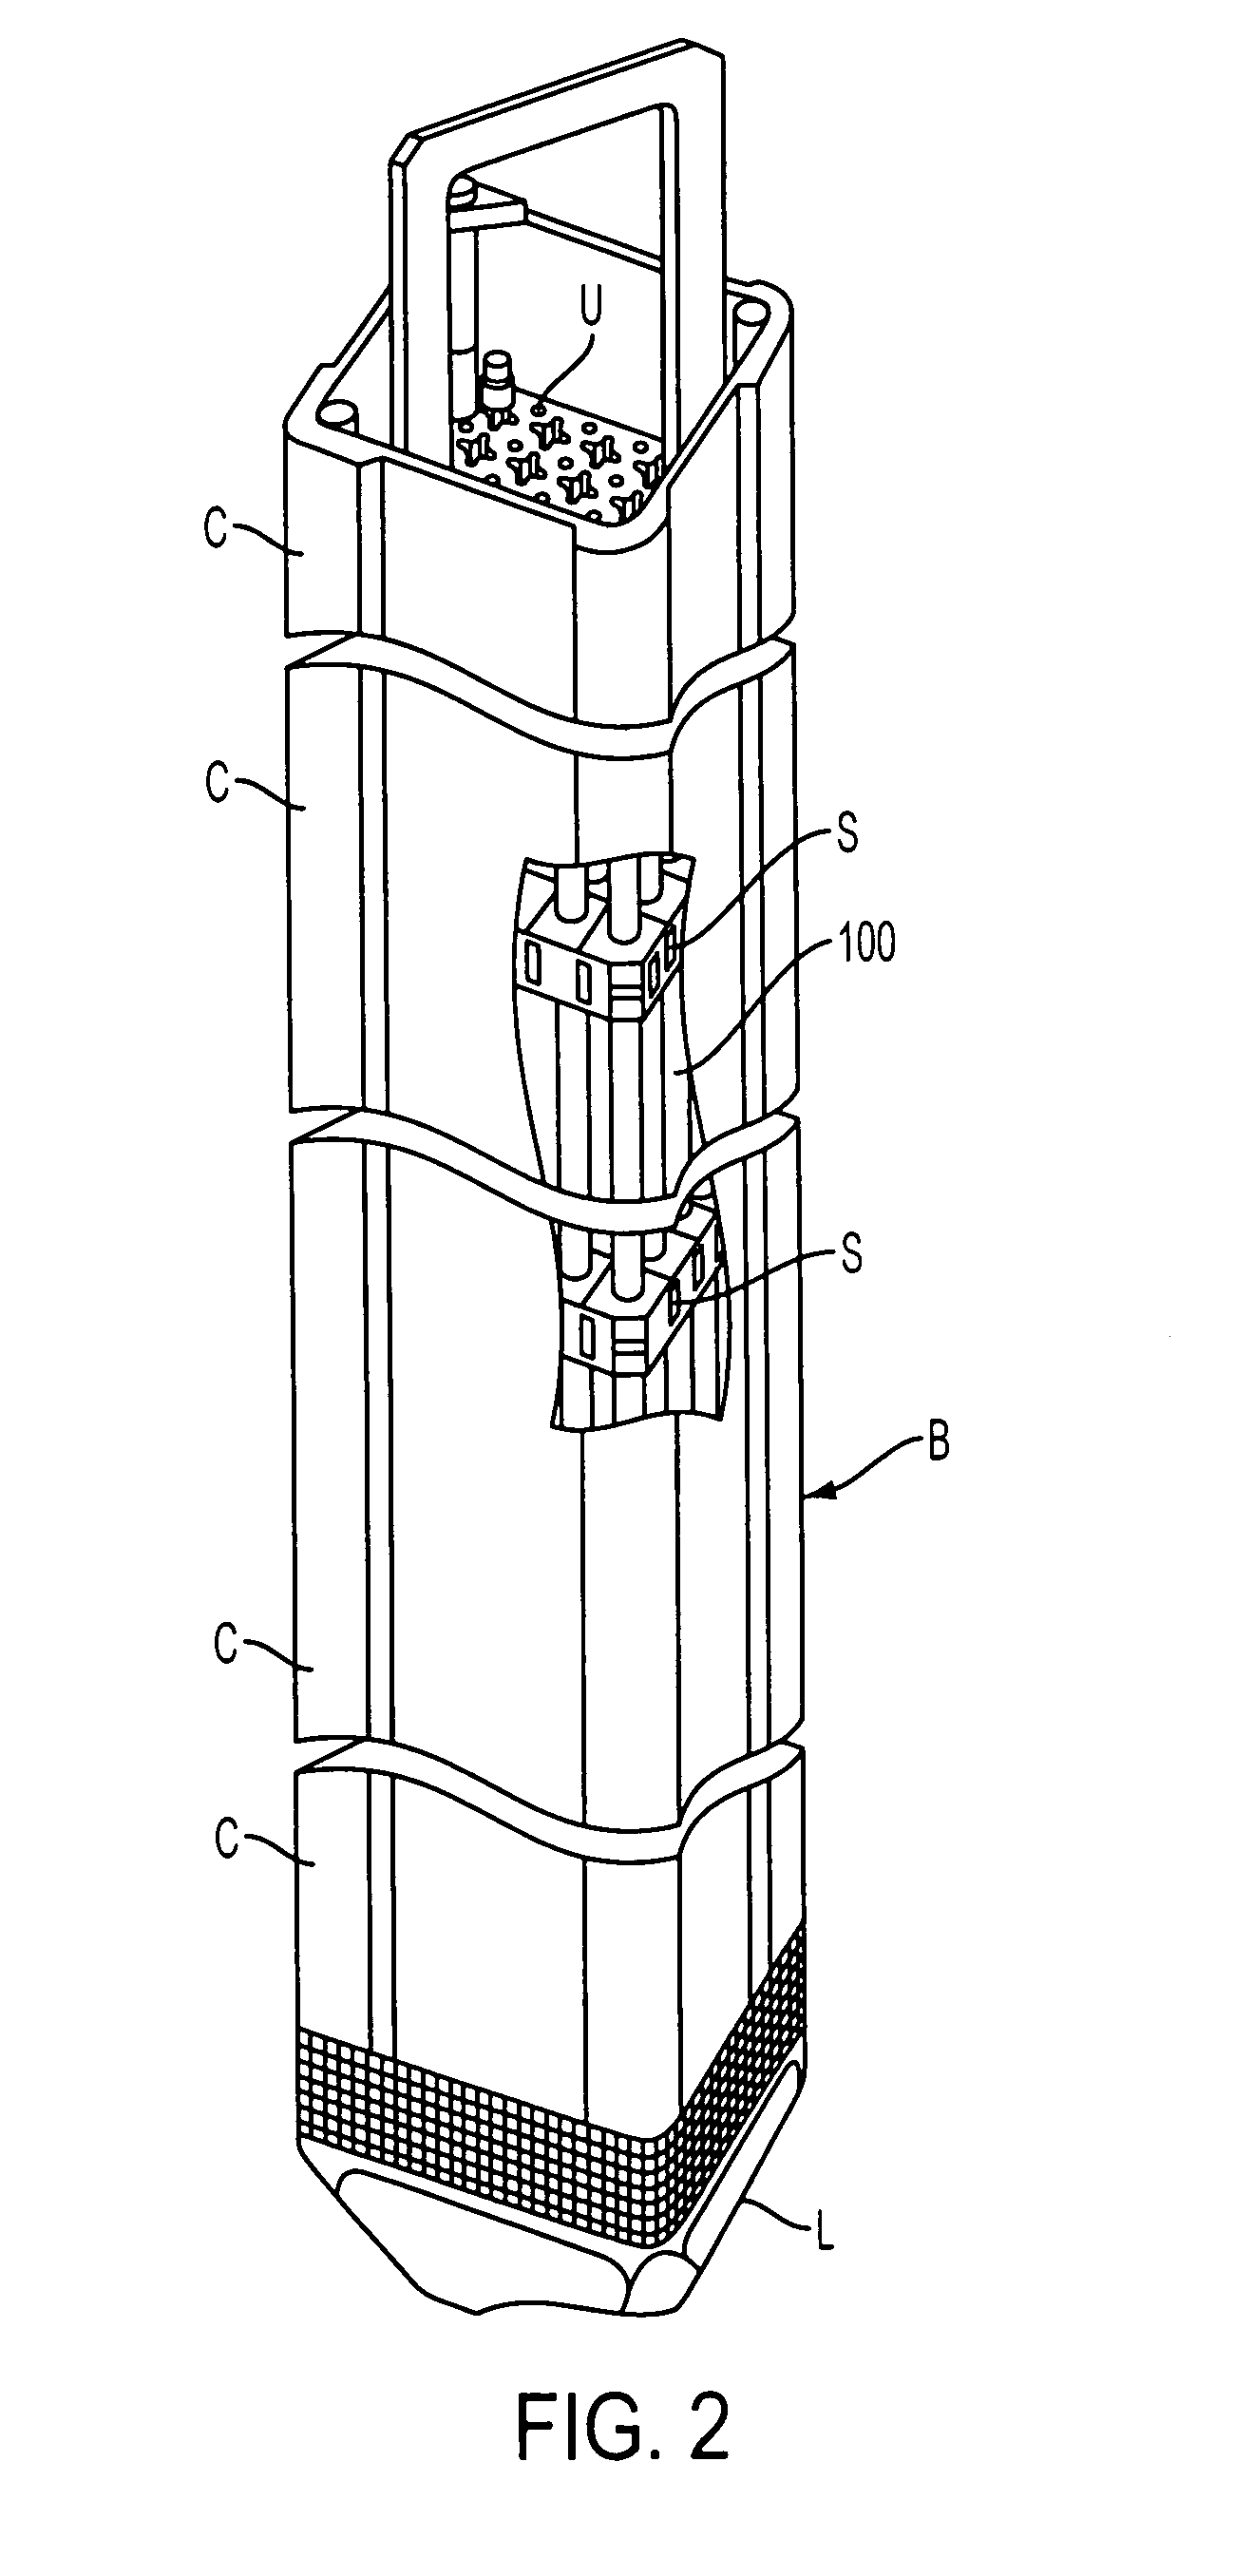 Method for improving energy output of a nuclear reactor, method for determining natural uranium blanket layer for a fuel bundle, and a fuel bundle having a variable blanket layer